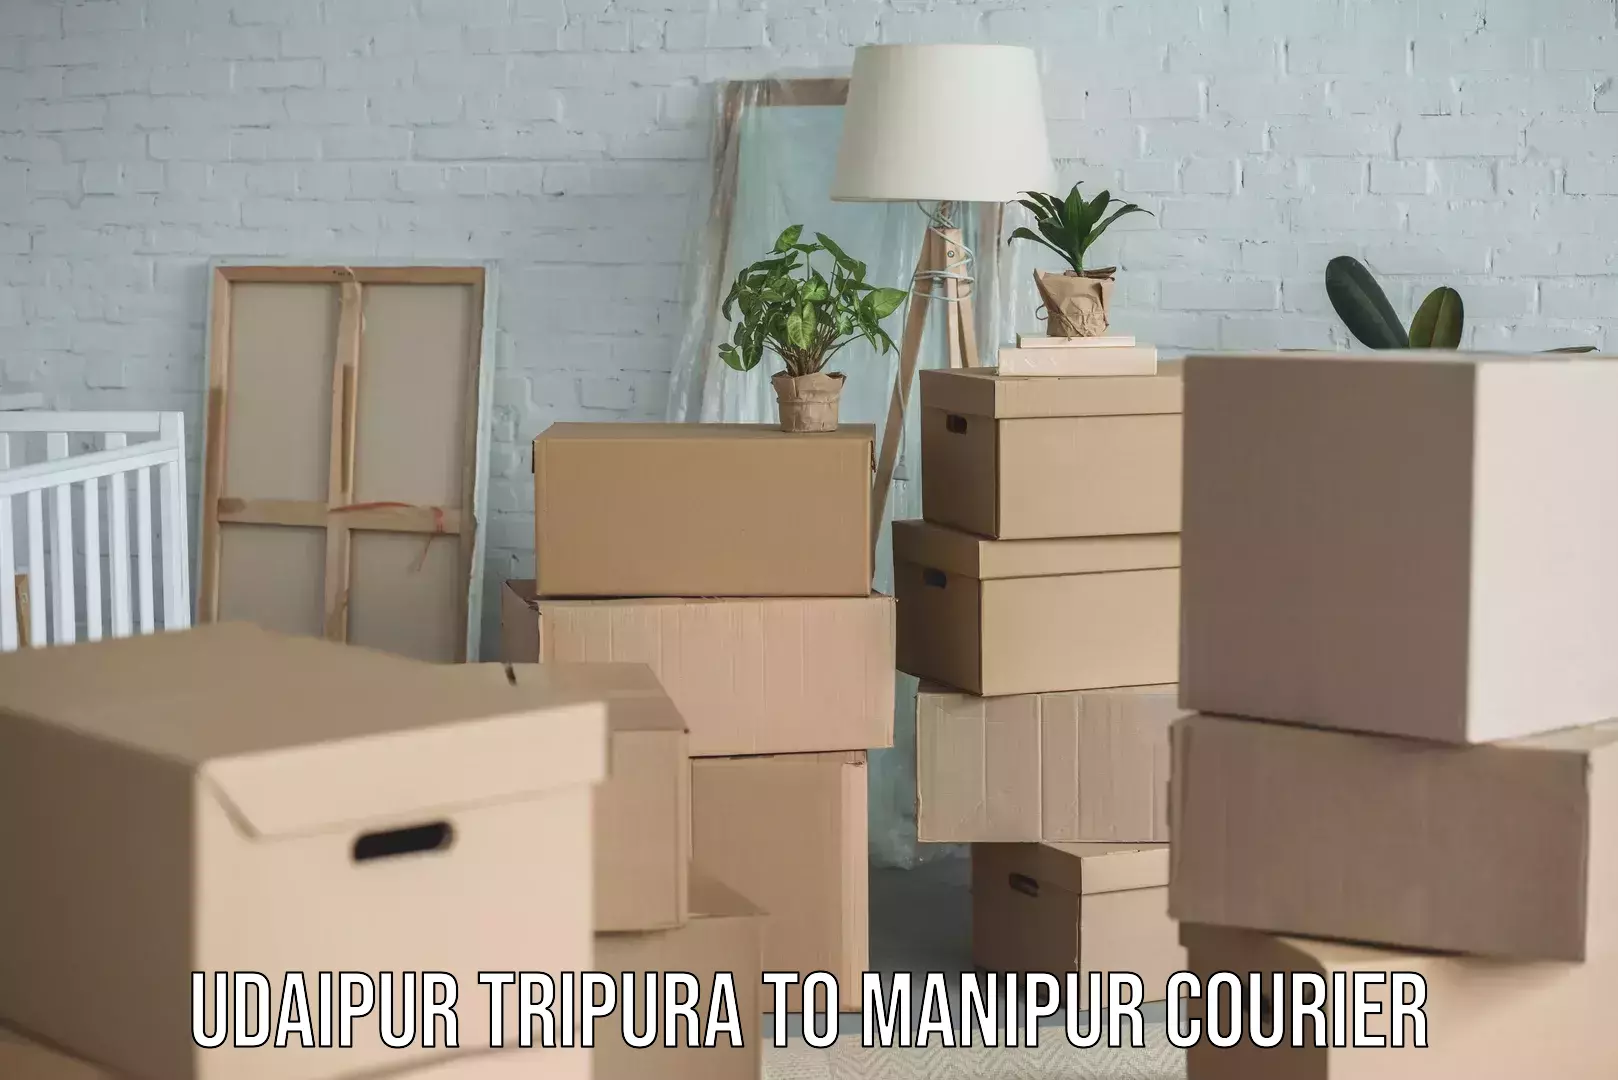 24/7 shipping services Udaipur Tripura to Manipur